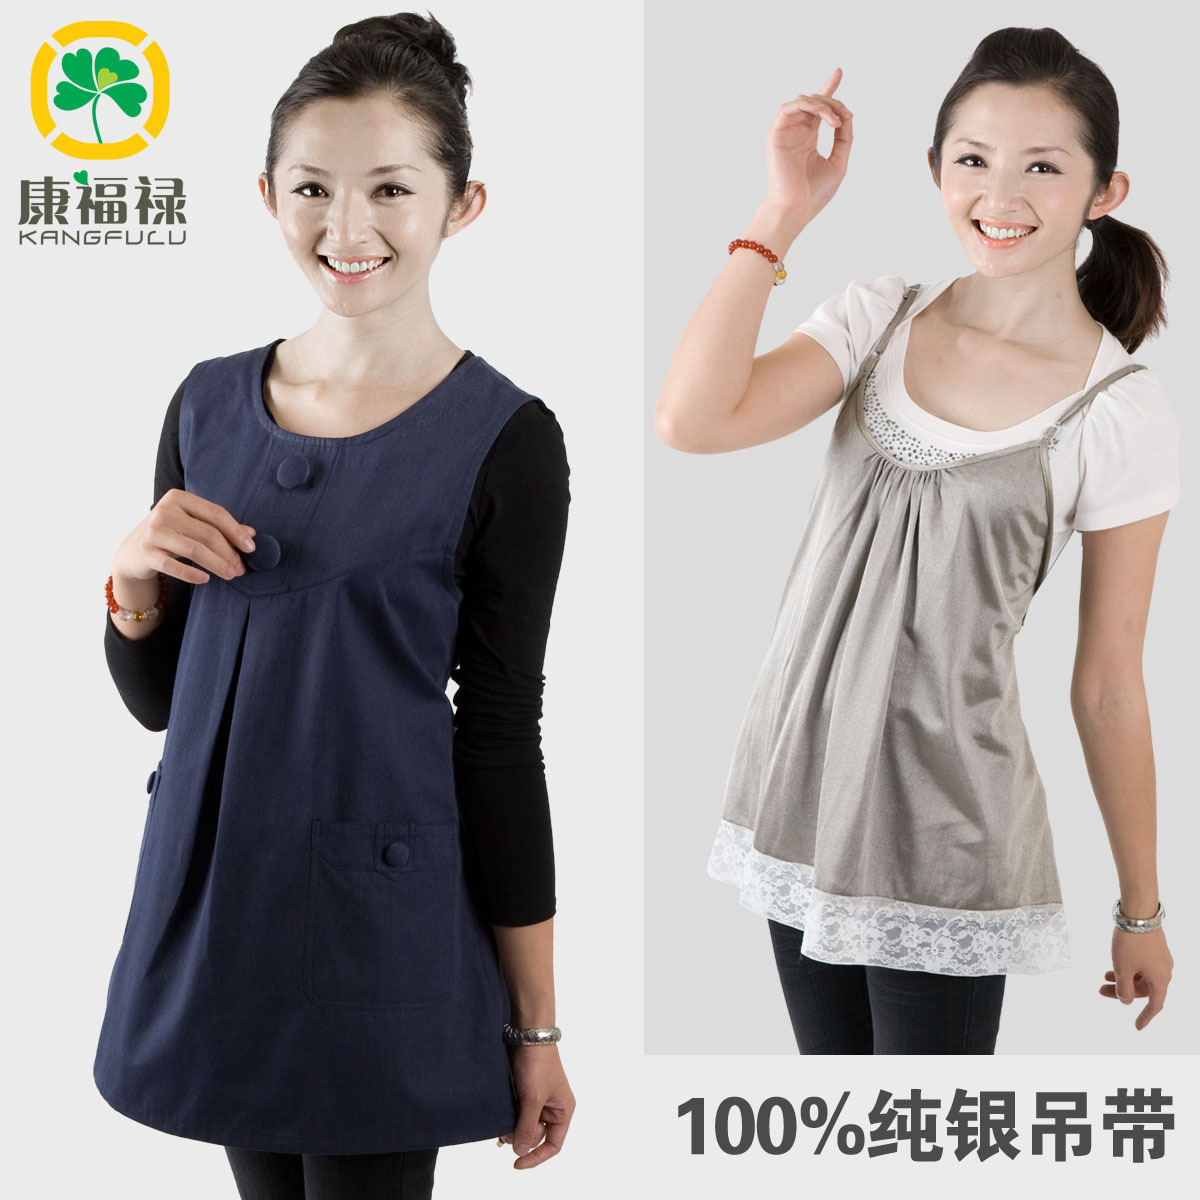 Double radiation-resistant silver fiber radiation-resistant maternity clothing 511cy2 full